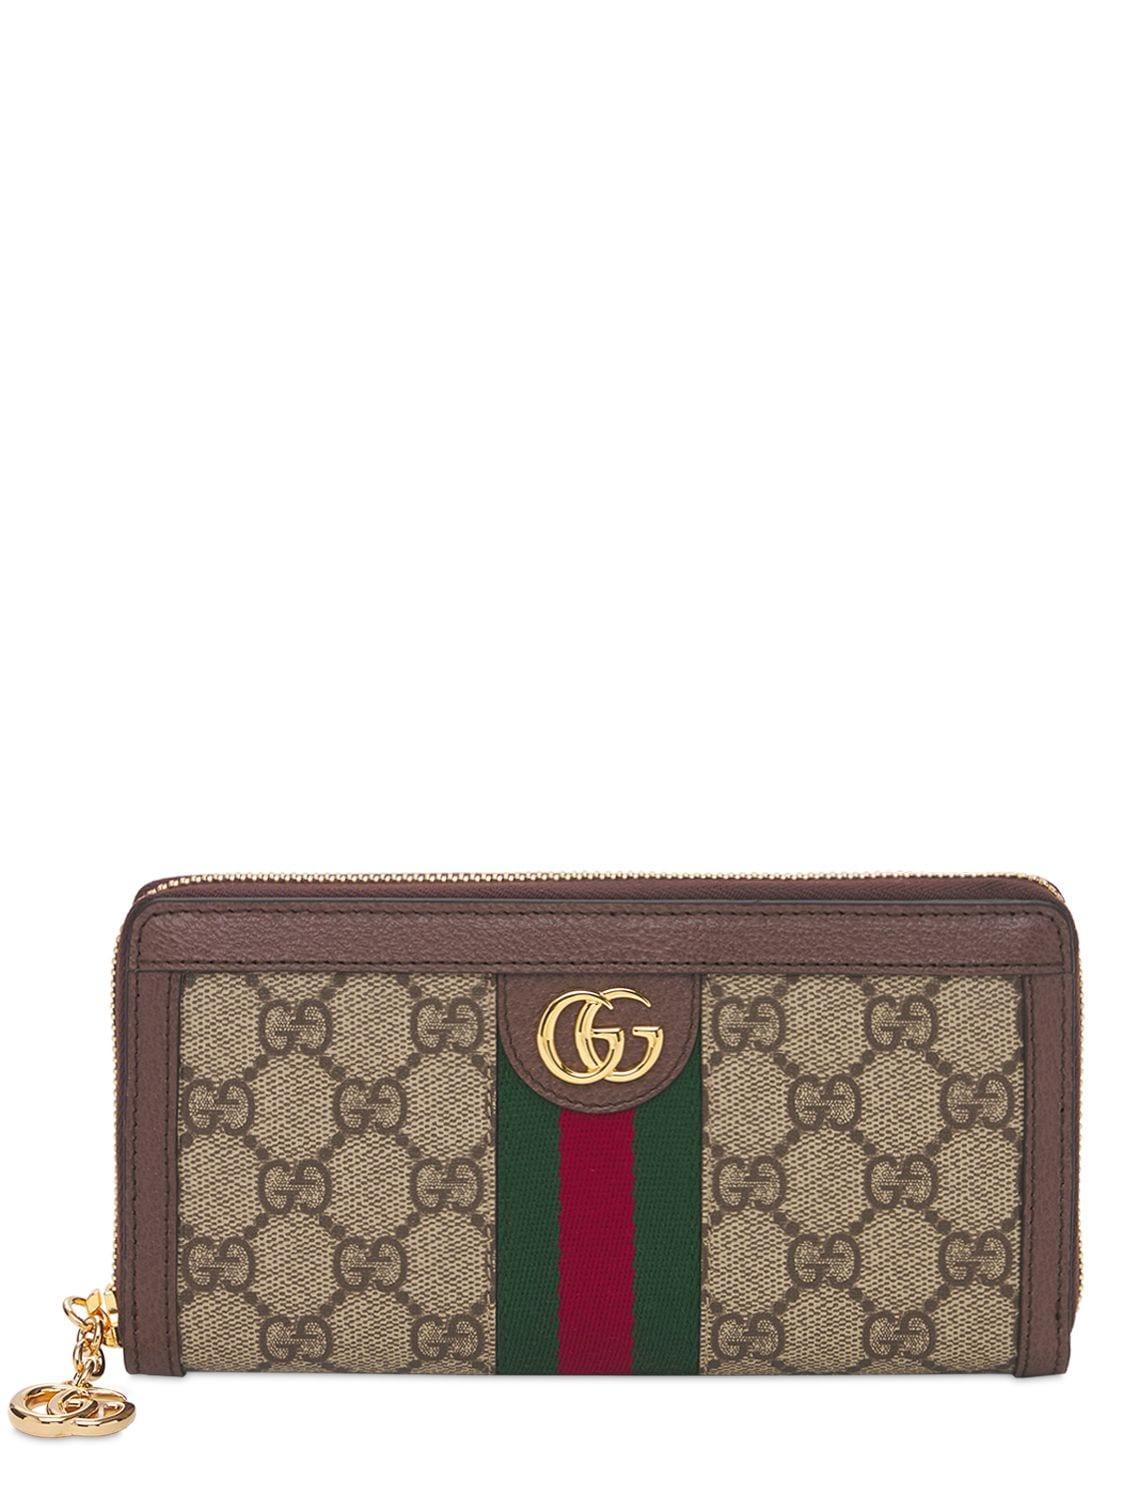 mens gucci ophidia wallet - clothing & accessories - by owner